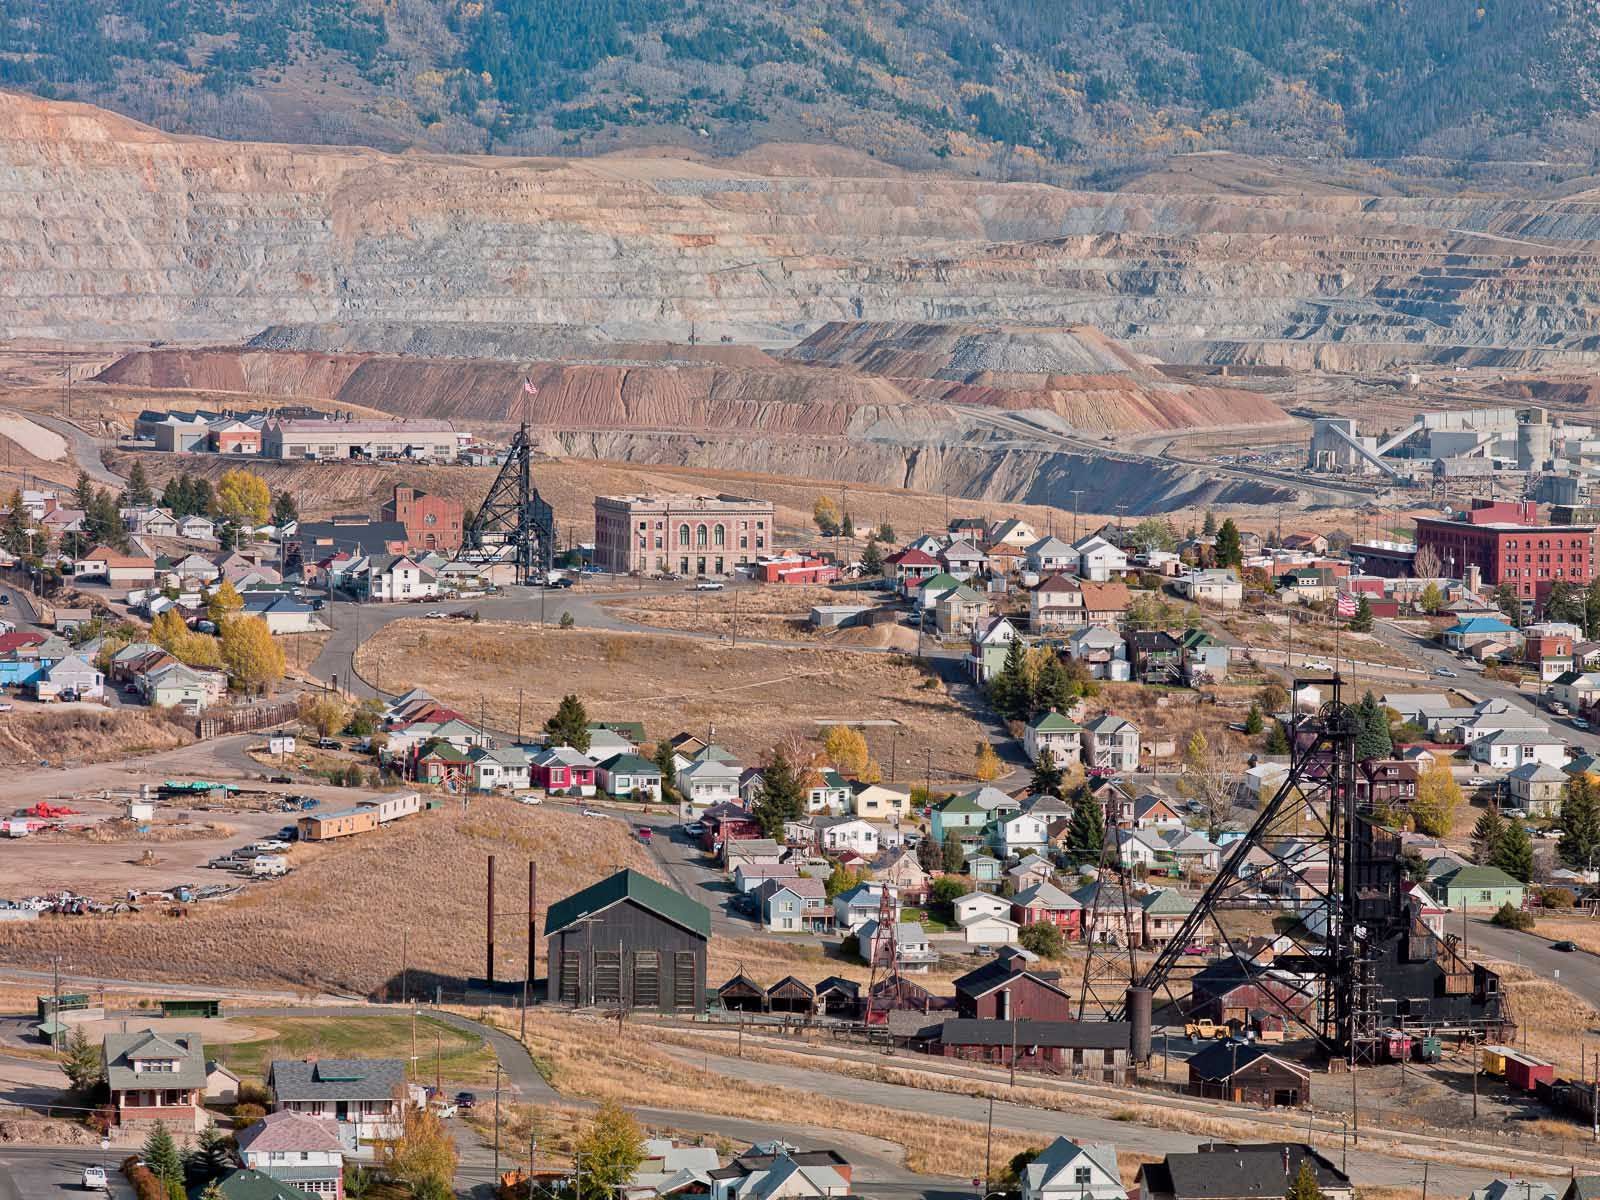 Butte, Montana, The Richest Hill on Earth